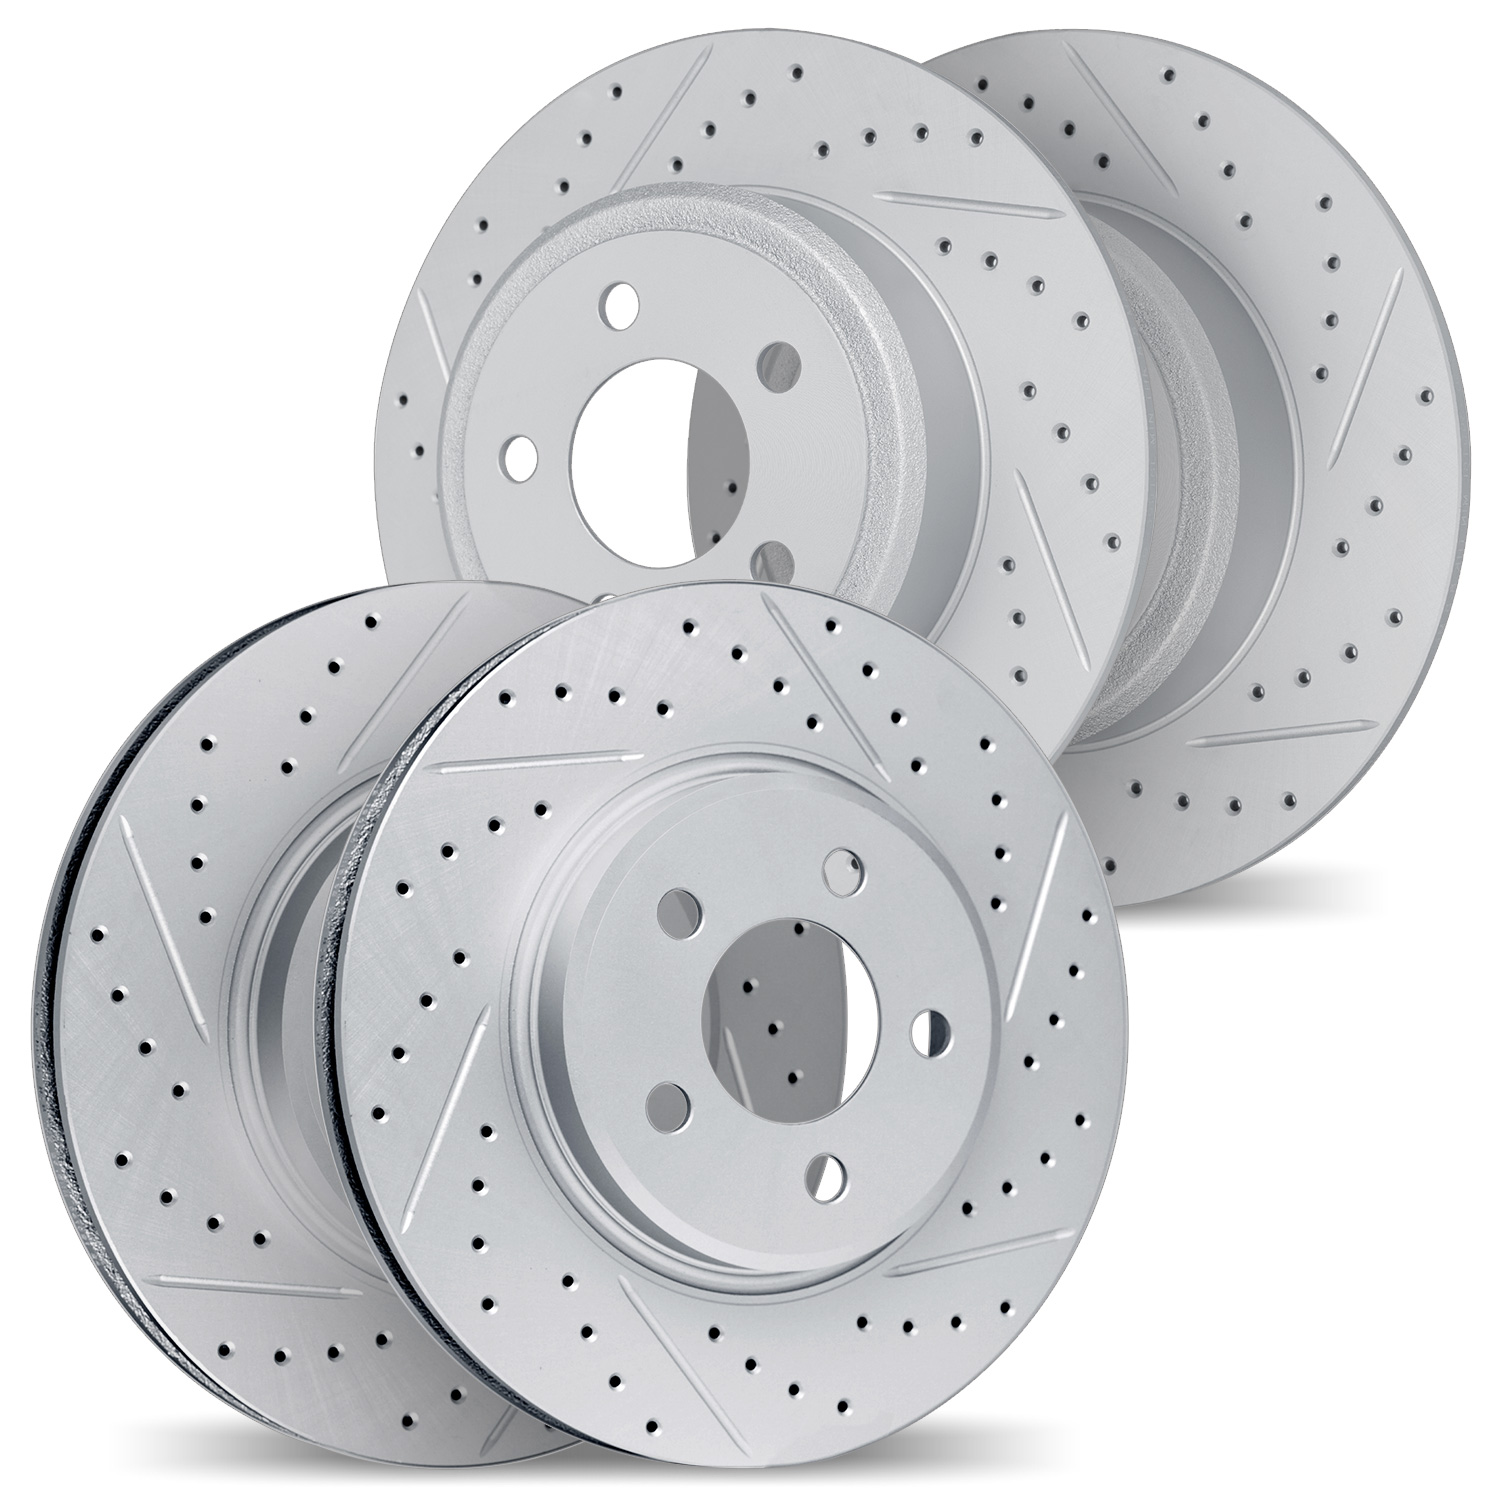 2004-76023 Geoperformance Drilled/Slotted Brake Rotors, 2009-2018 Multiple Makes/Models, Position: Front and Rear